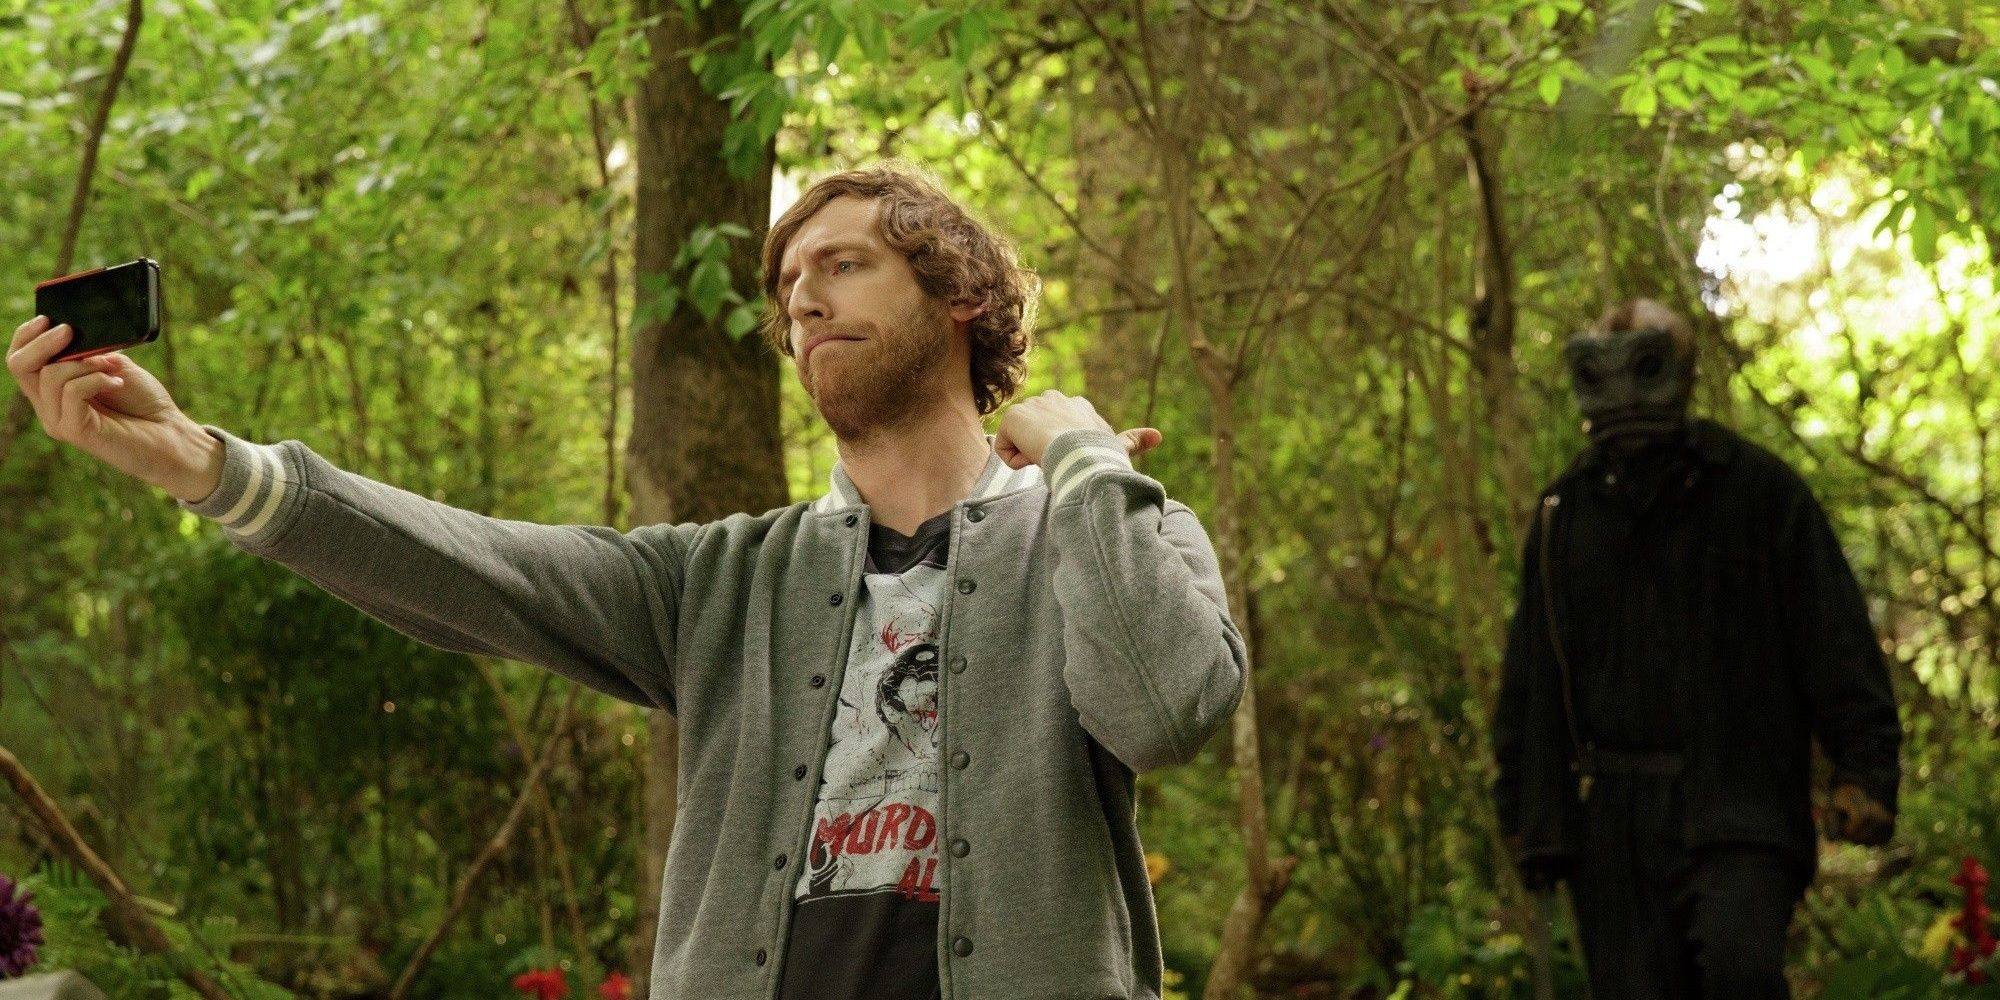 A killer sneaks up on Duncan as he holds up his phone in The Final Girls